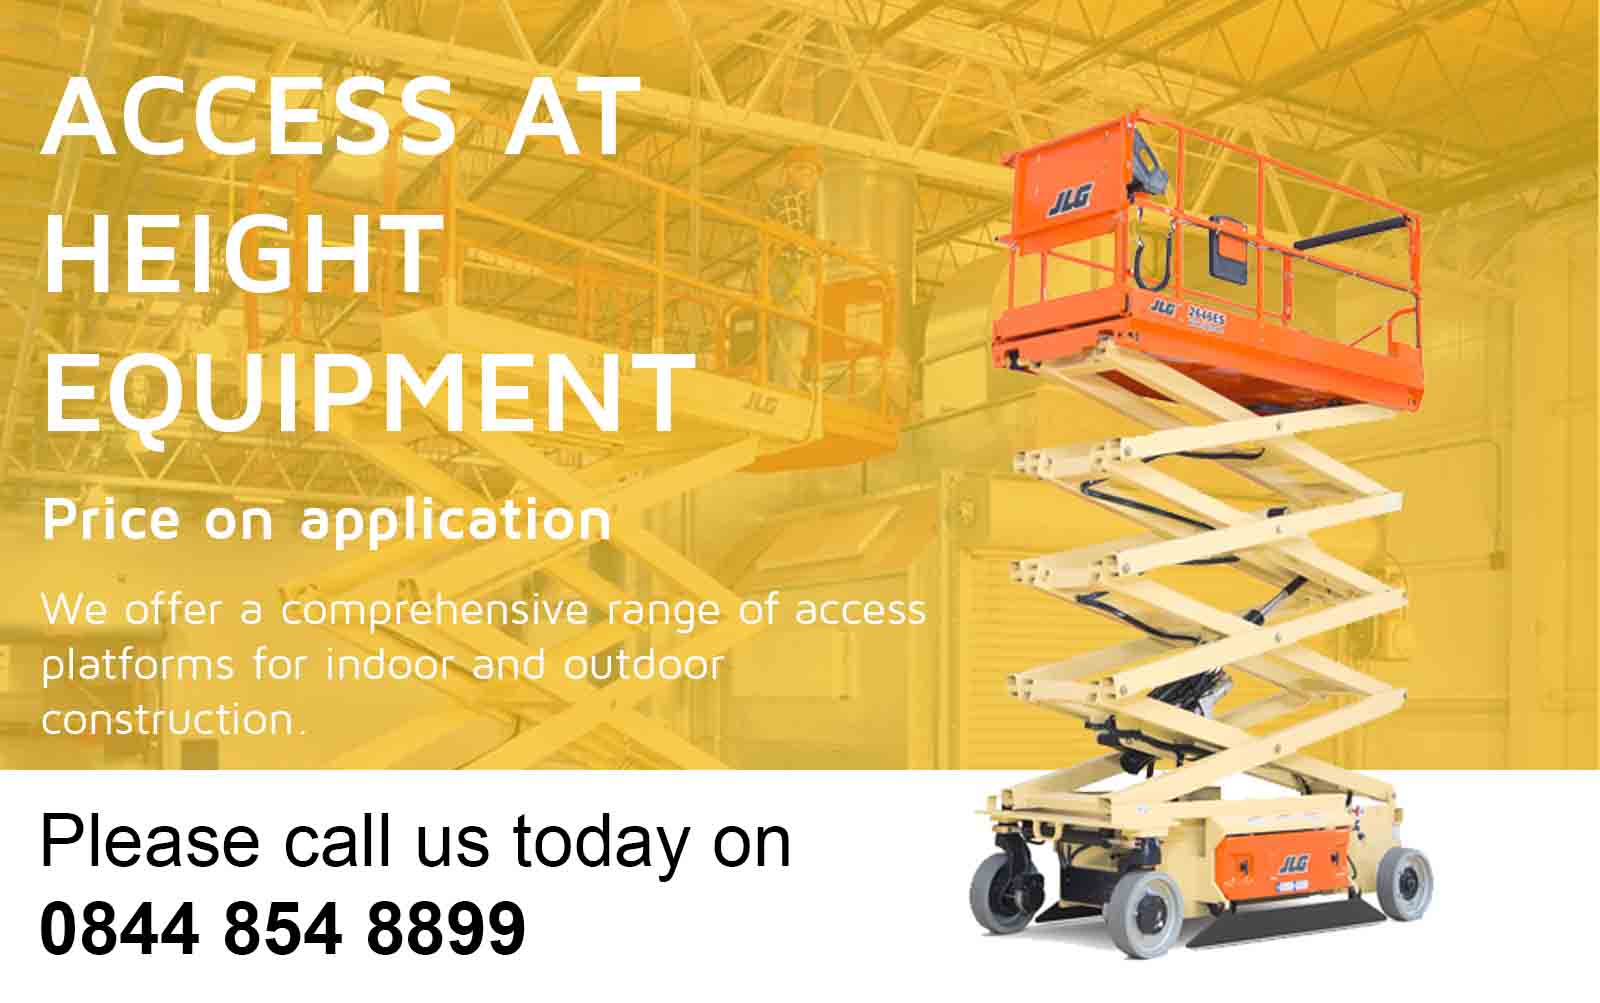 JLG Access Height Equipment for sale